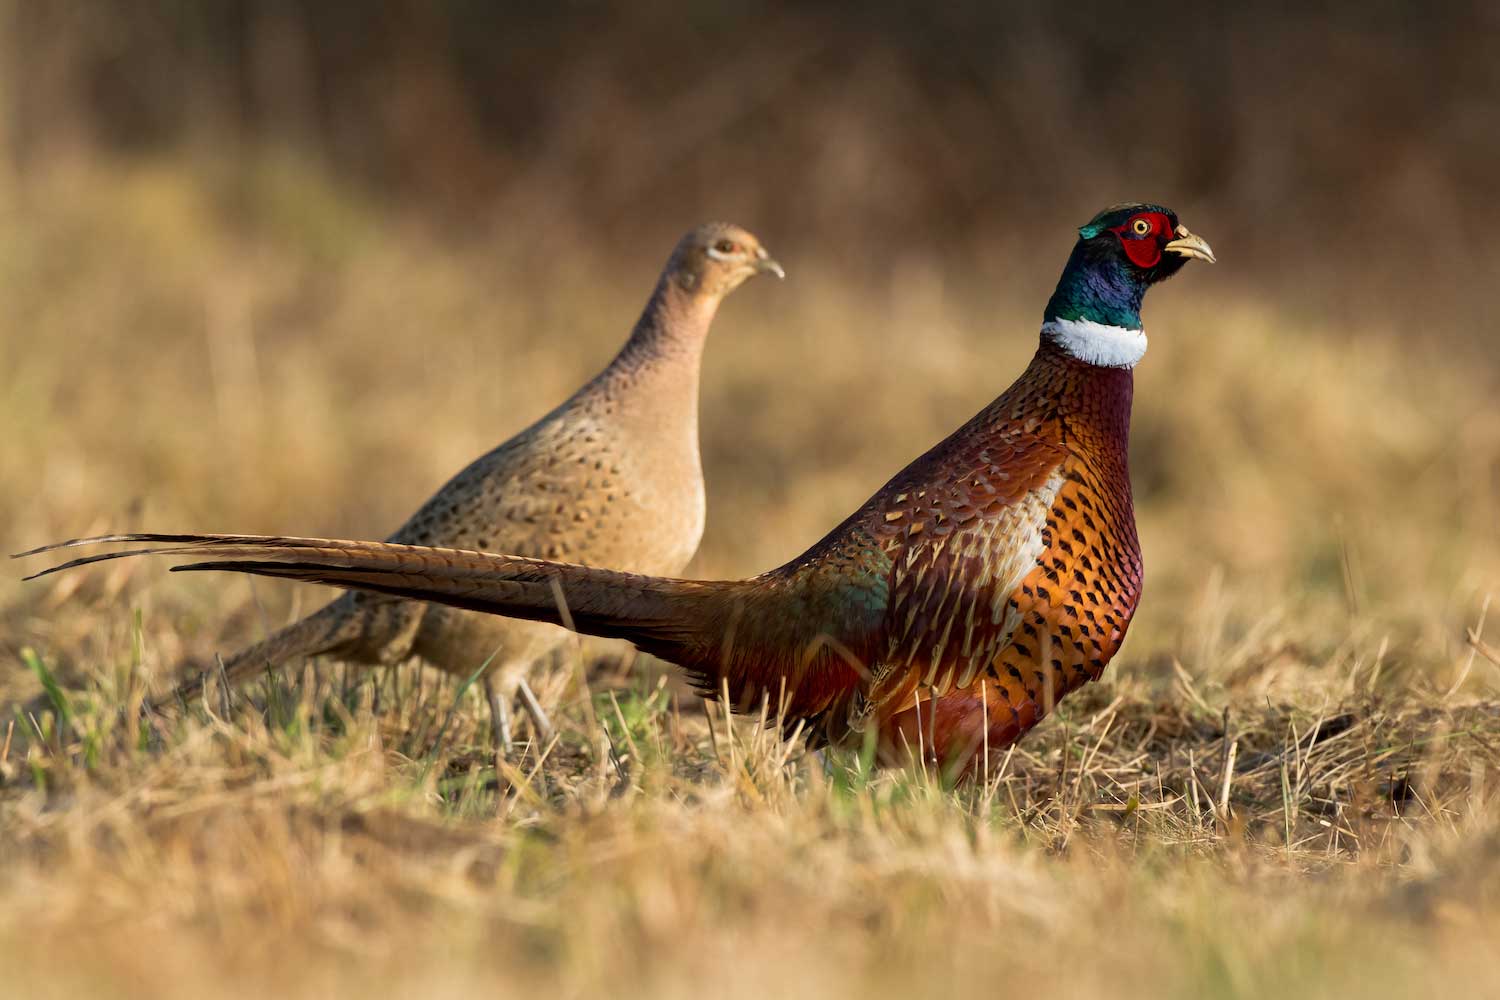 A male and female ring-necked pheasant in grass.